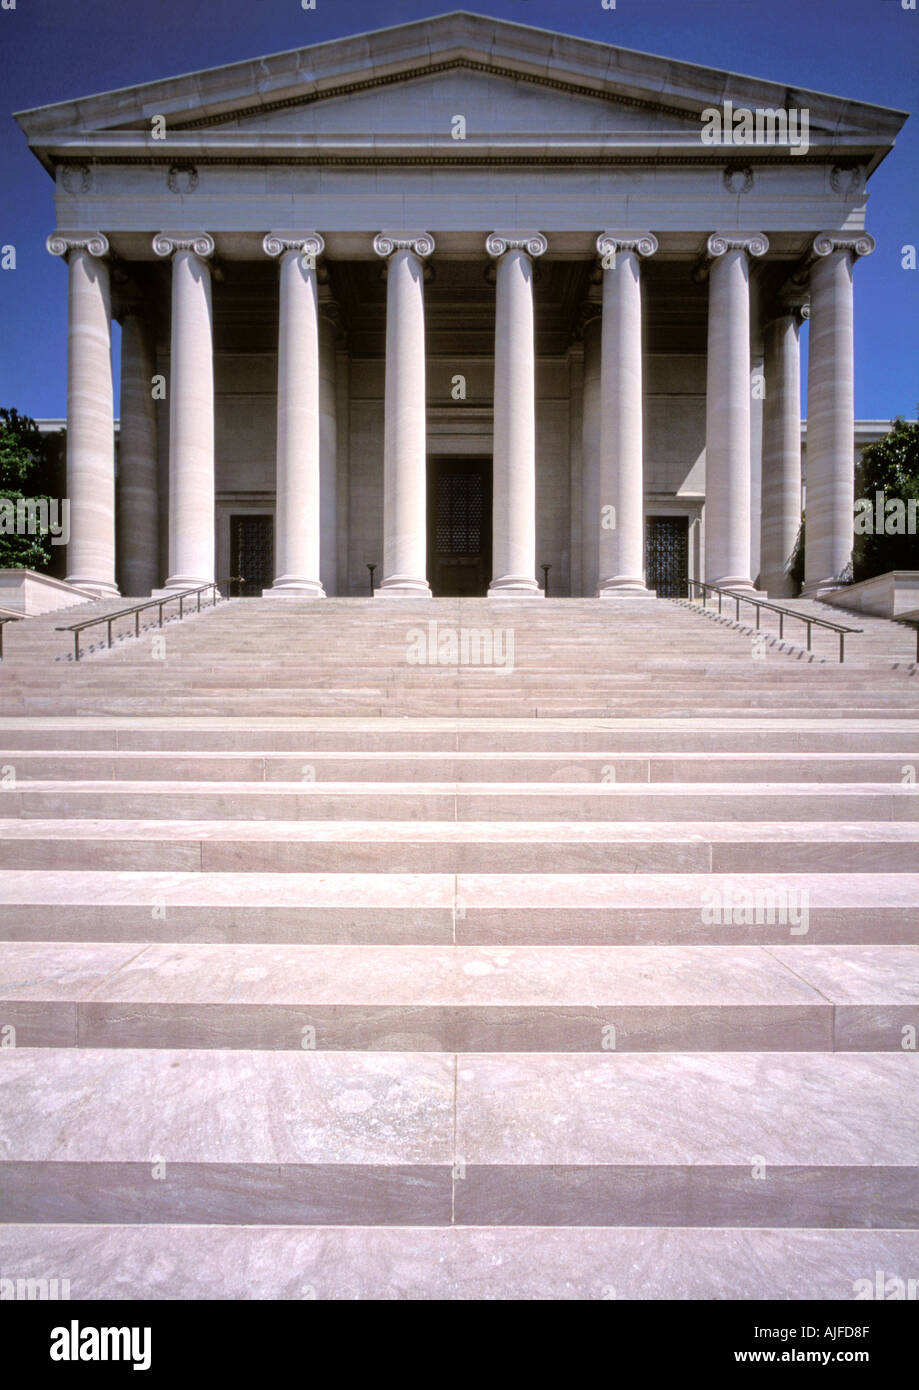 National Gallery of Art in Washington D.C. Stock Photo